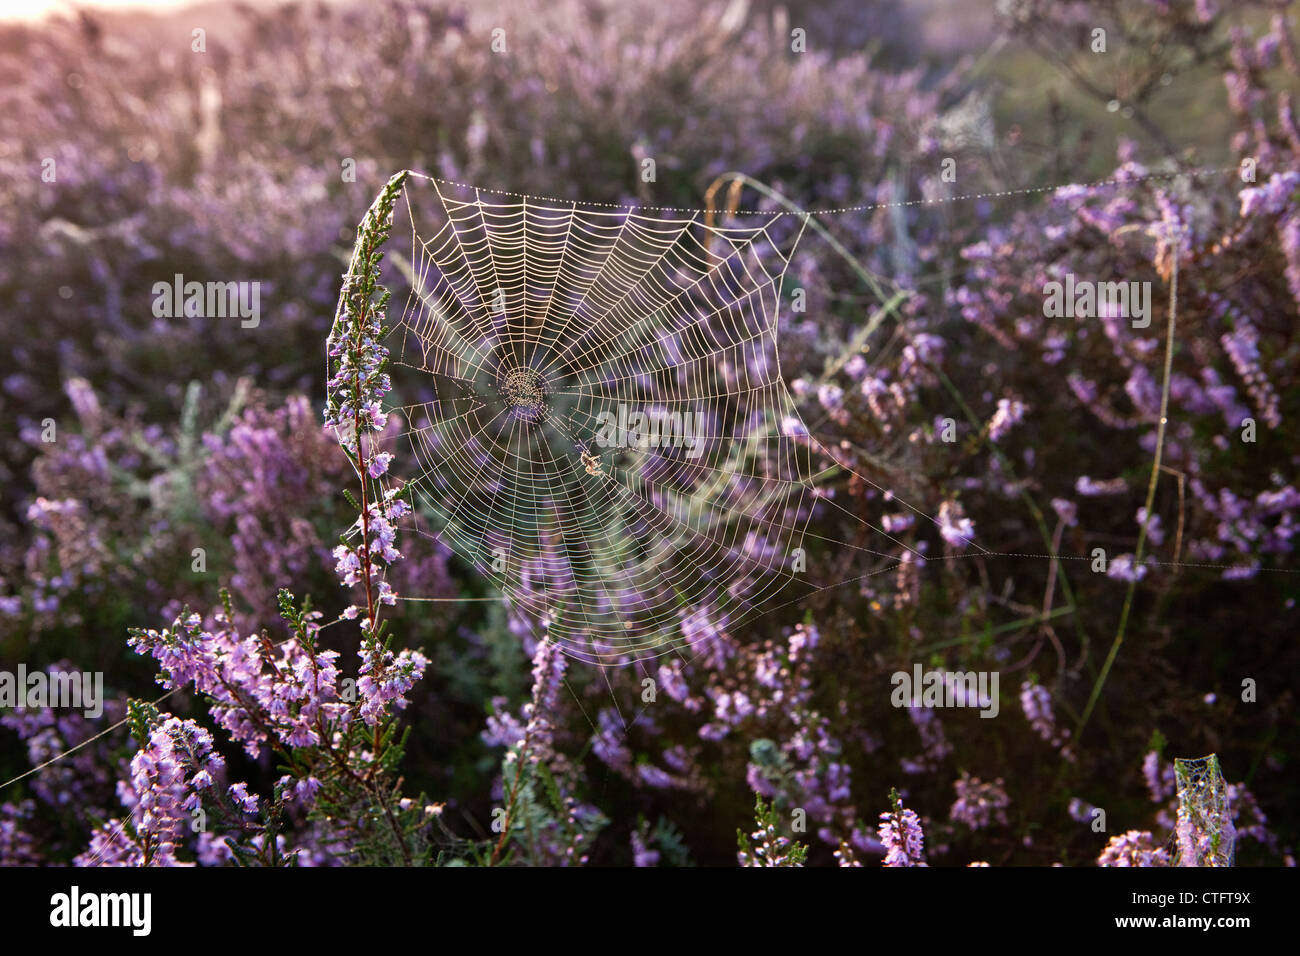 The Netherlands, Bussum, Early morning, flowering heath. Spider in web. Stock Photo